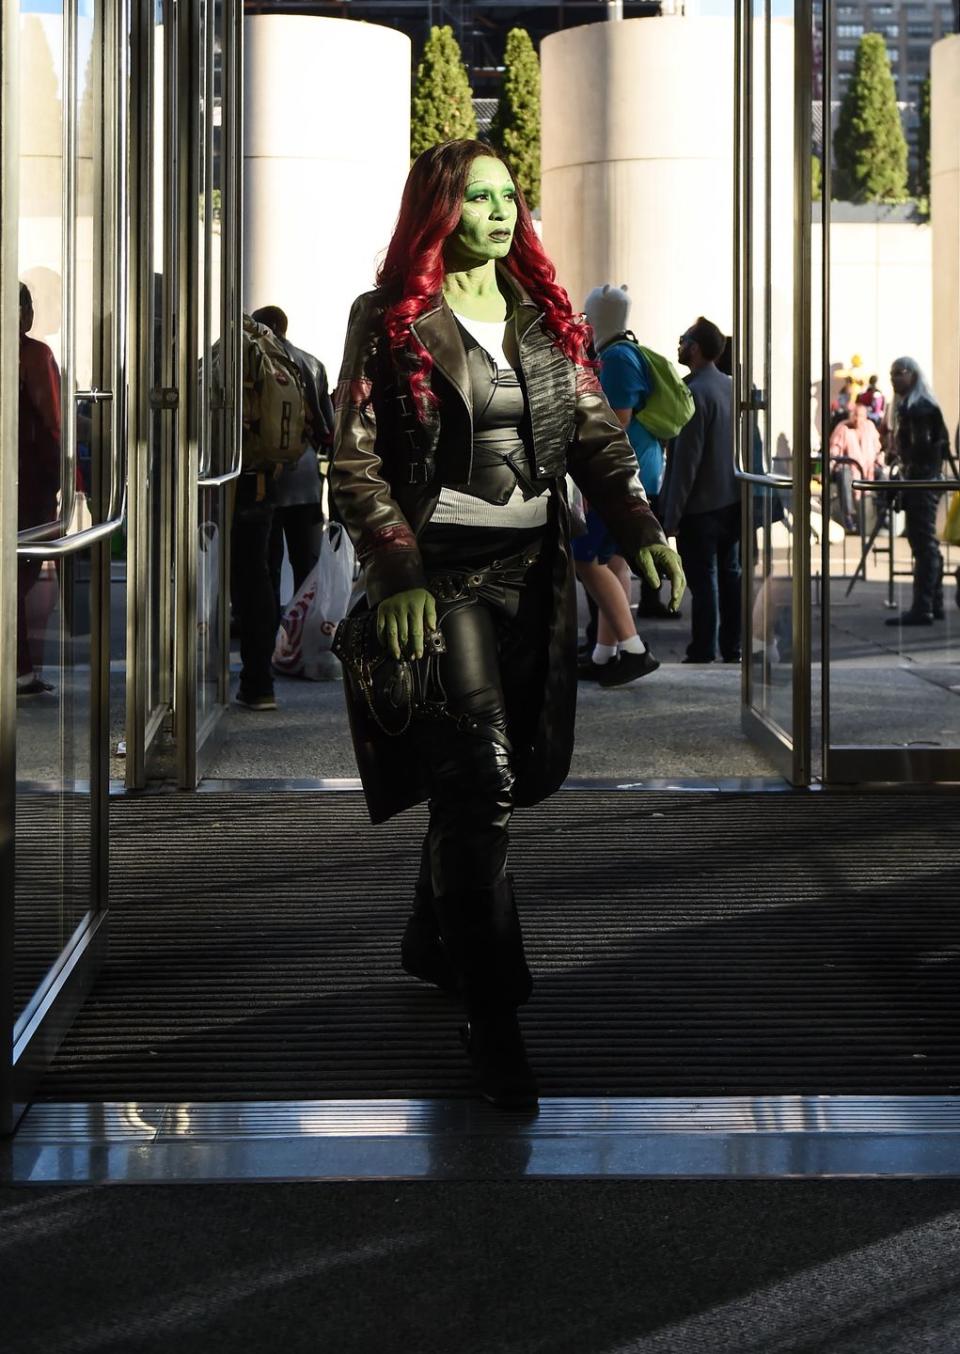 Gamora in 'Guardians of the Galaxy'